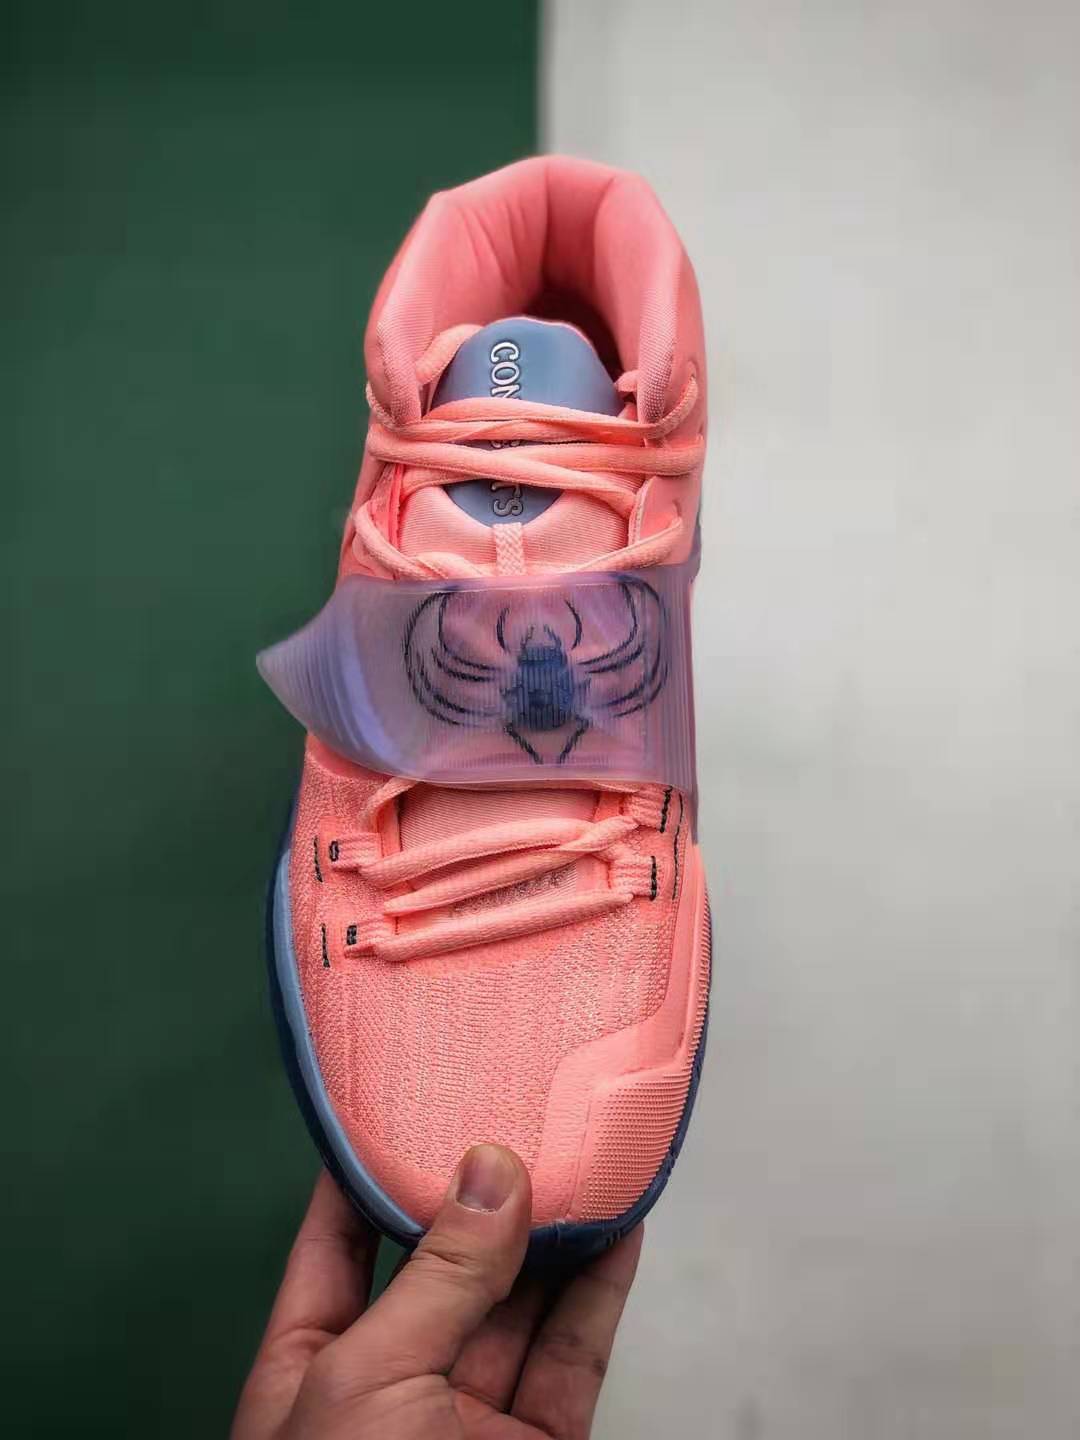 Concepts x Nike Kyrie 6 Khepri Pink Tint Guava Ice CU8879-600 - Unique Collaboration For Basketball Enthusiasts